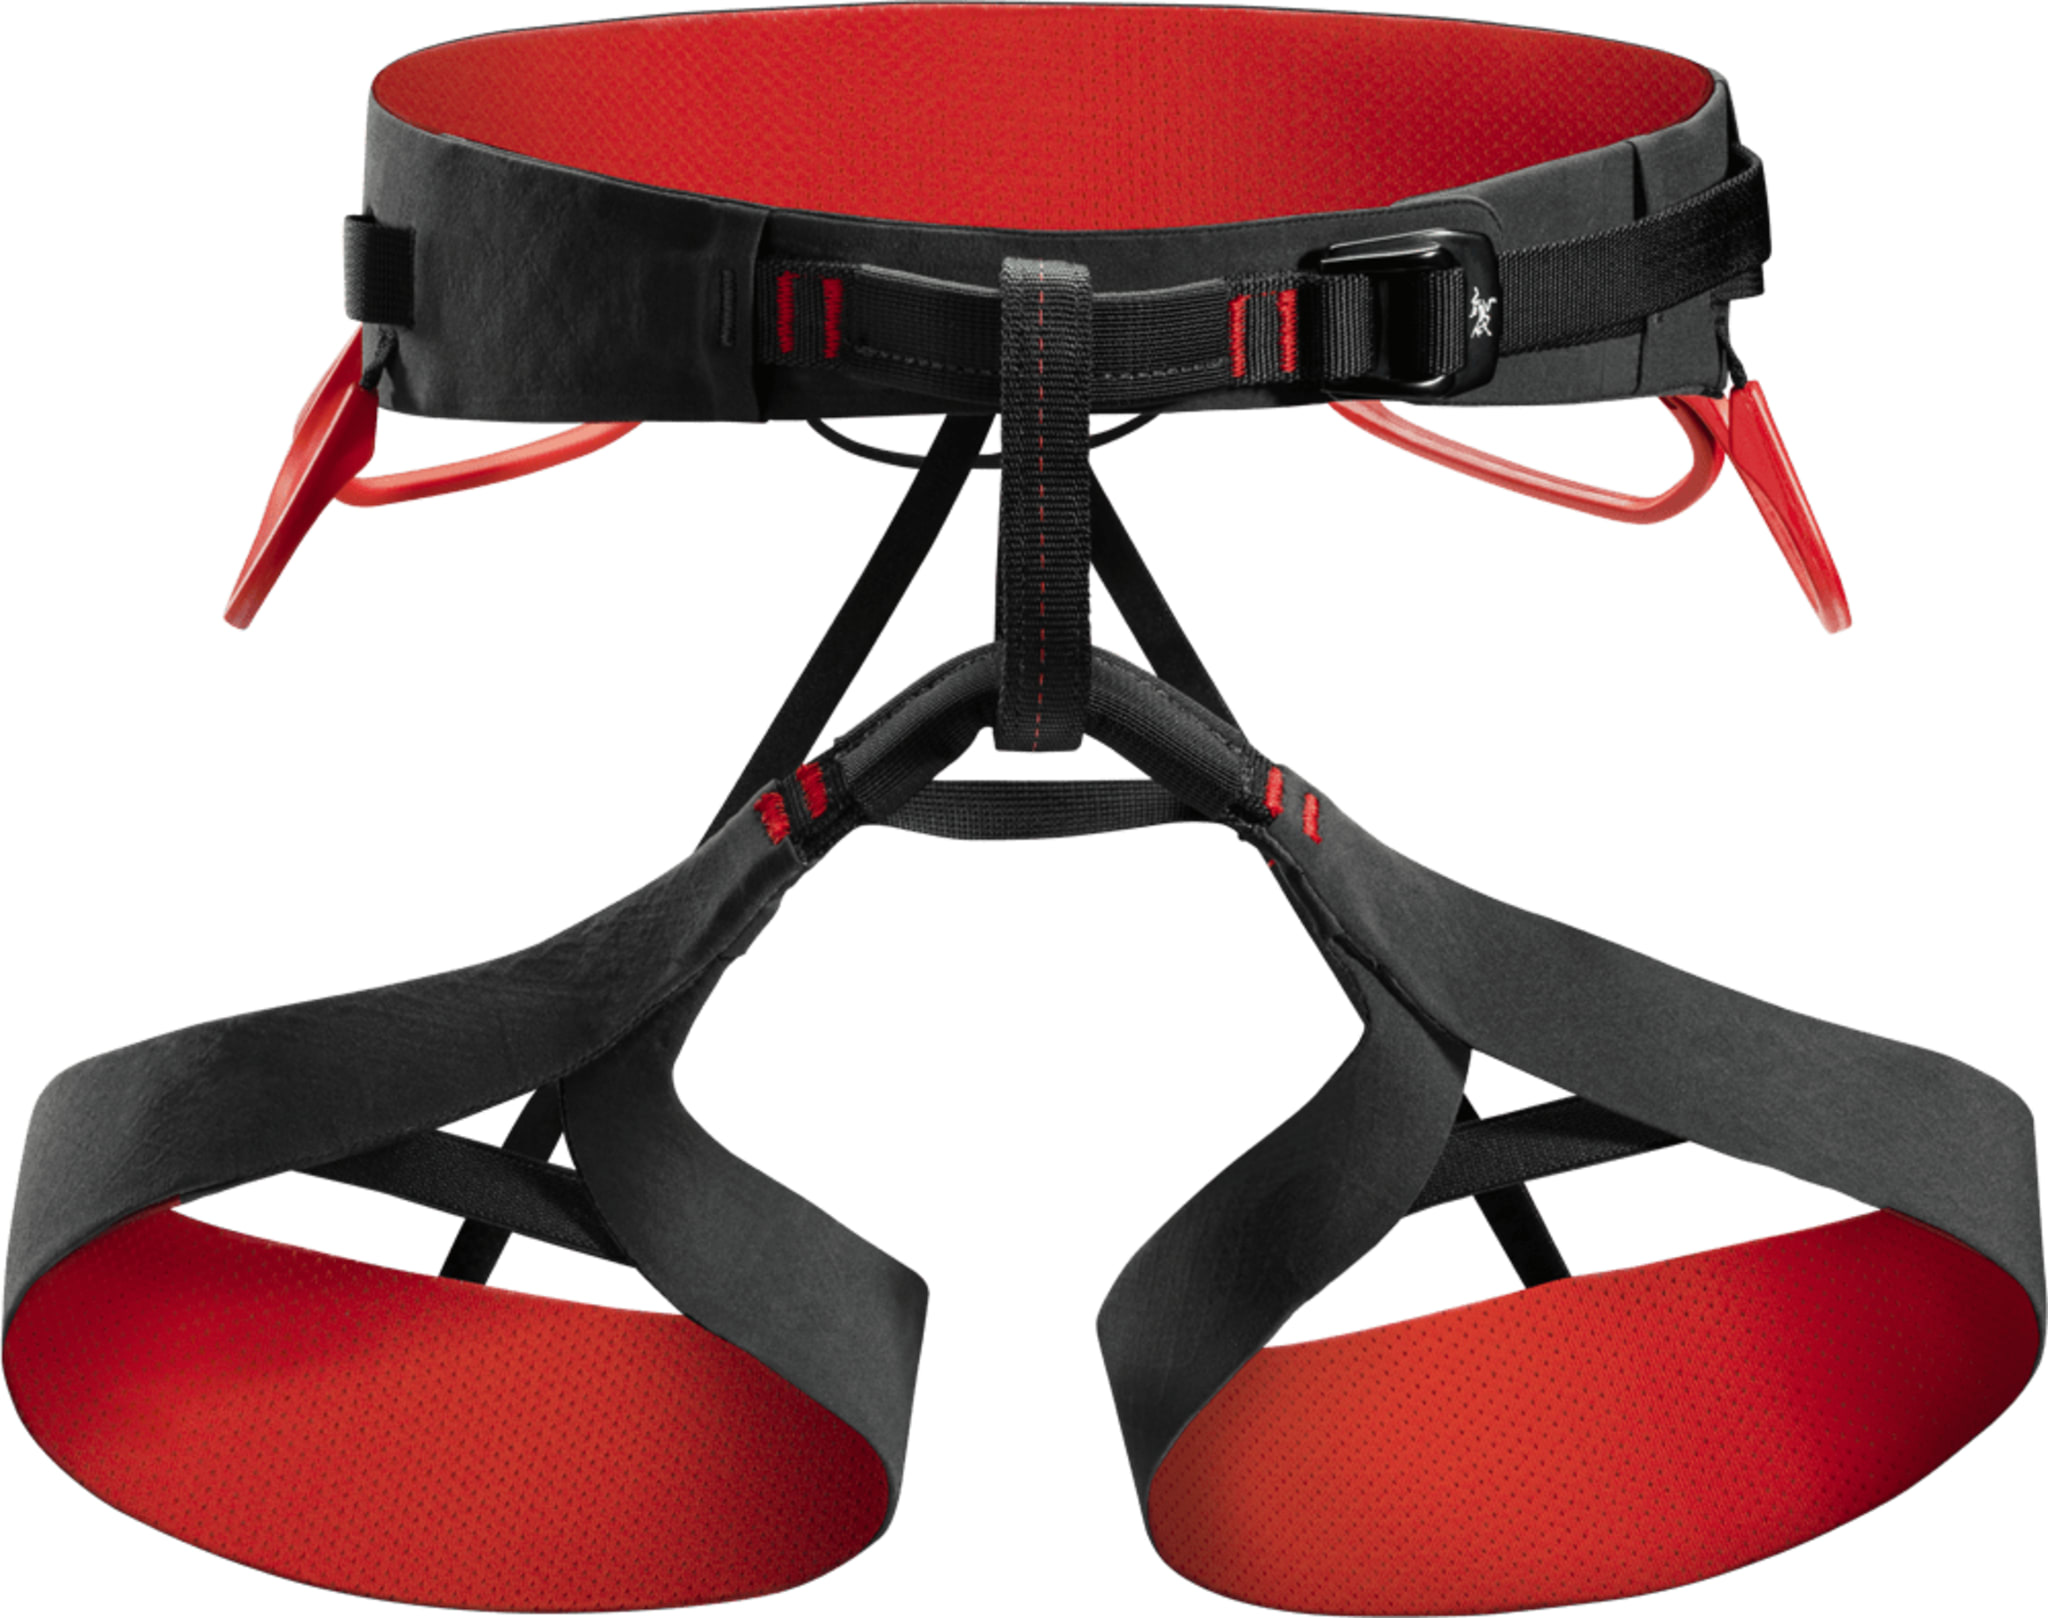 C-quence Harness Ms